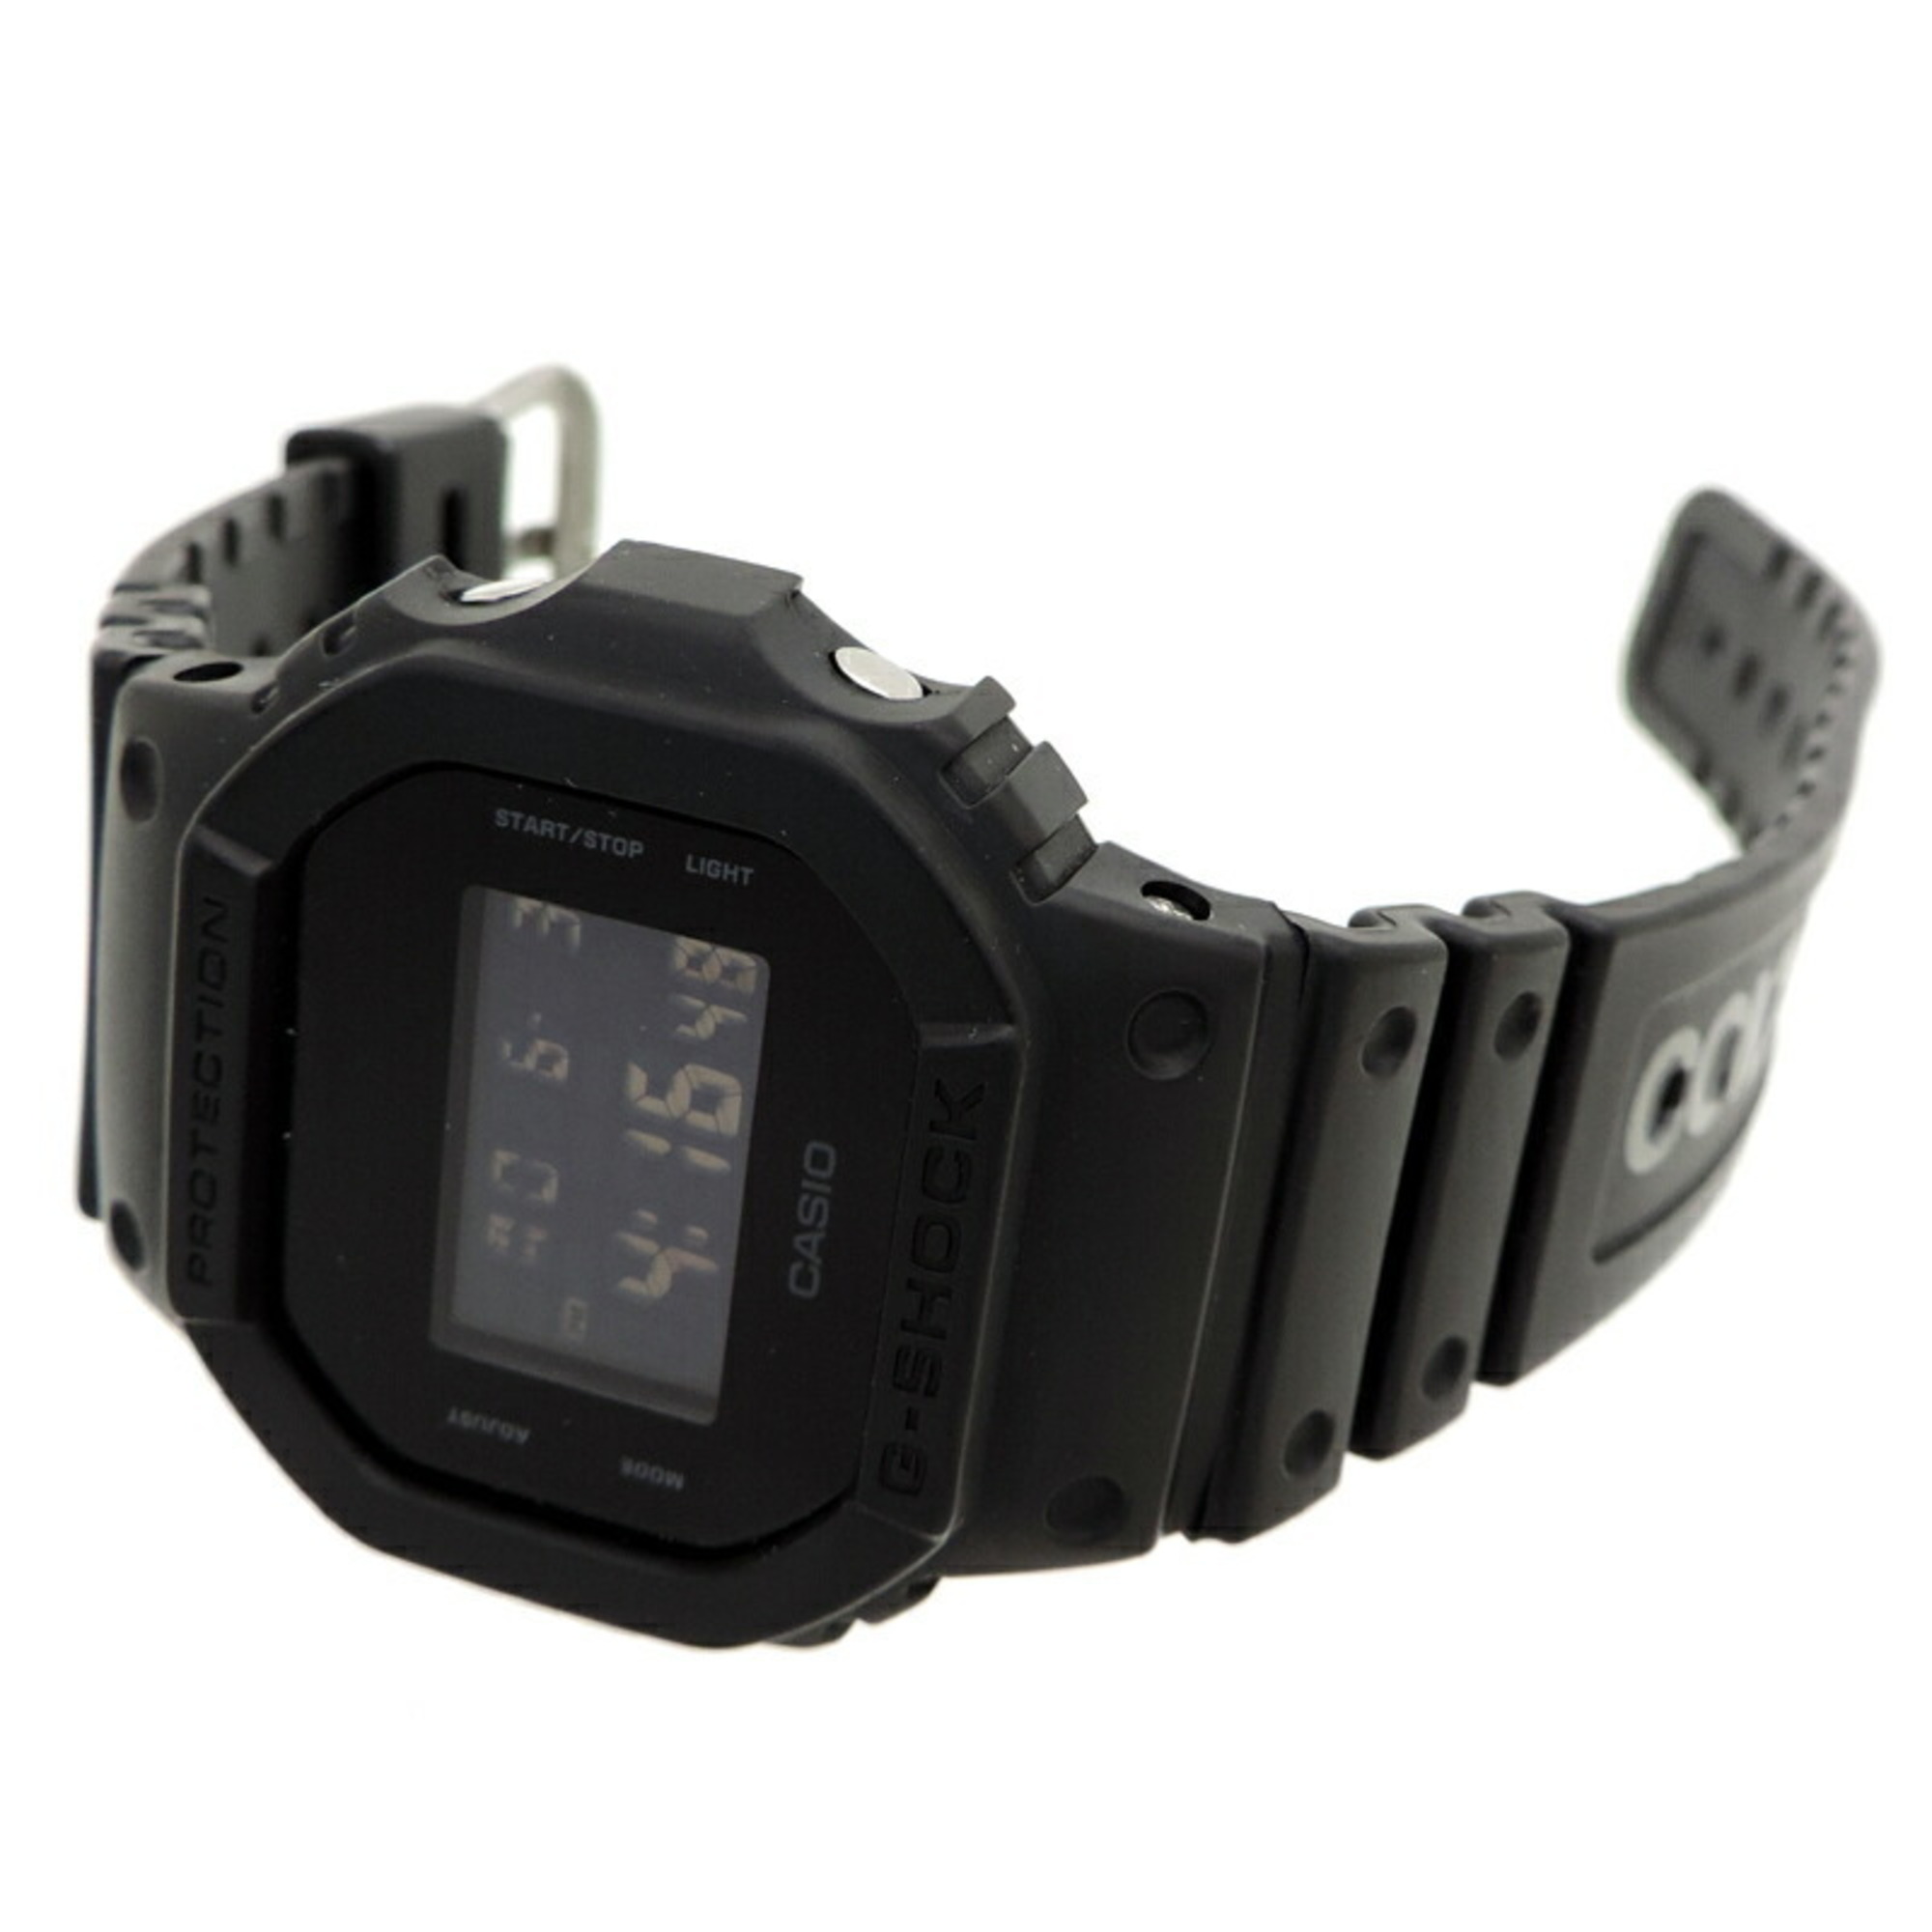 Casio G-SHOCK 5600 Series Comme des Garcons Black Market Limited Edition Women's and Men's Watches DW-5600BB-1JF